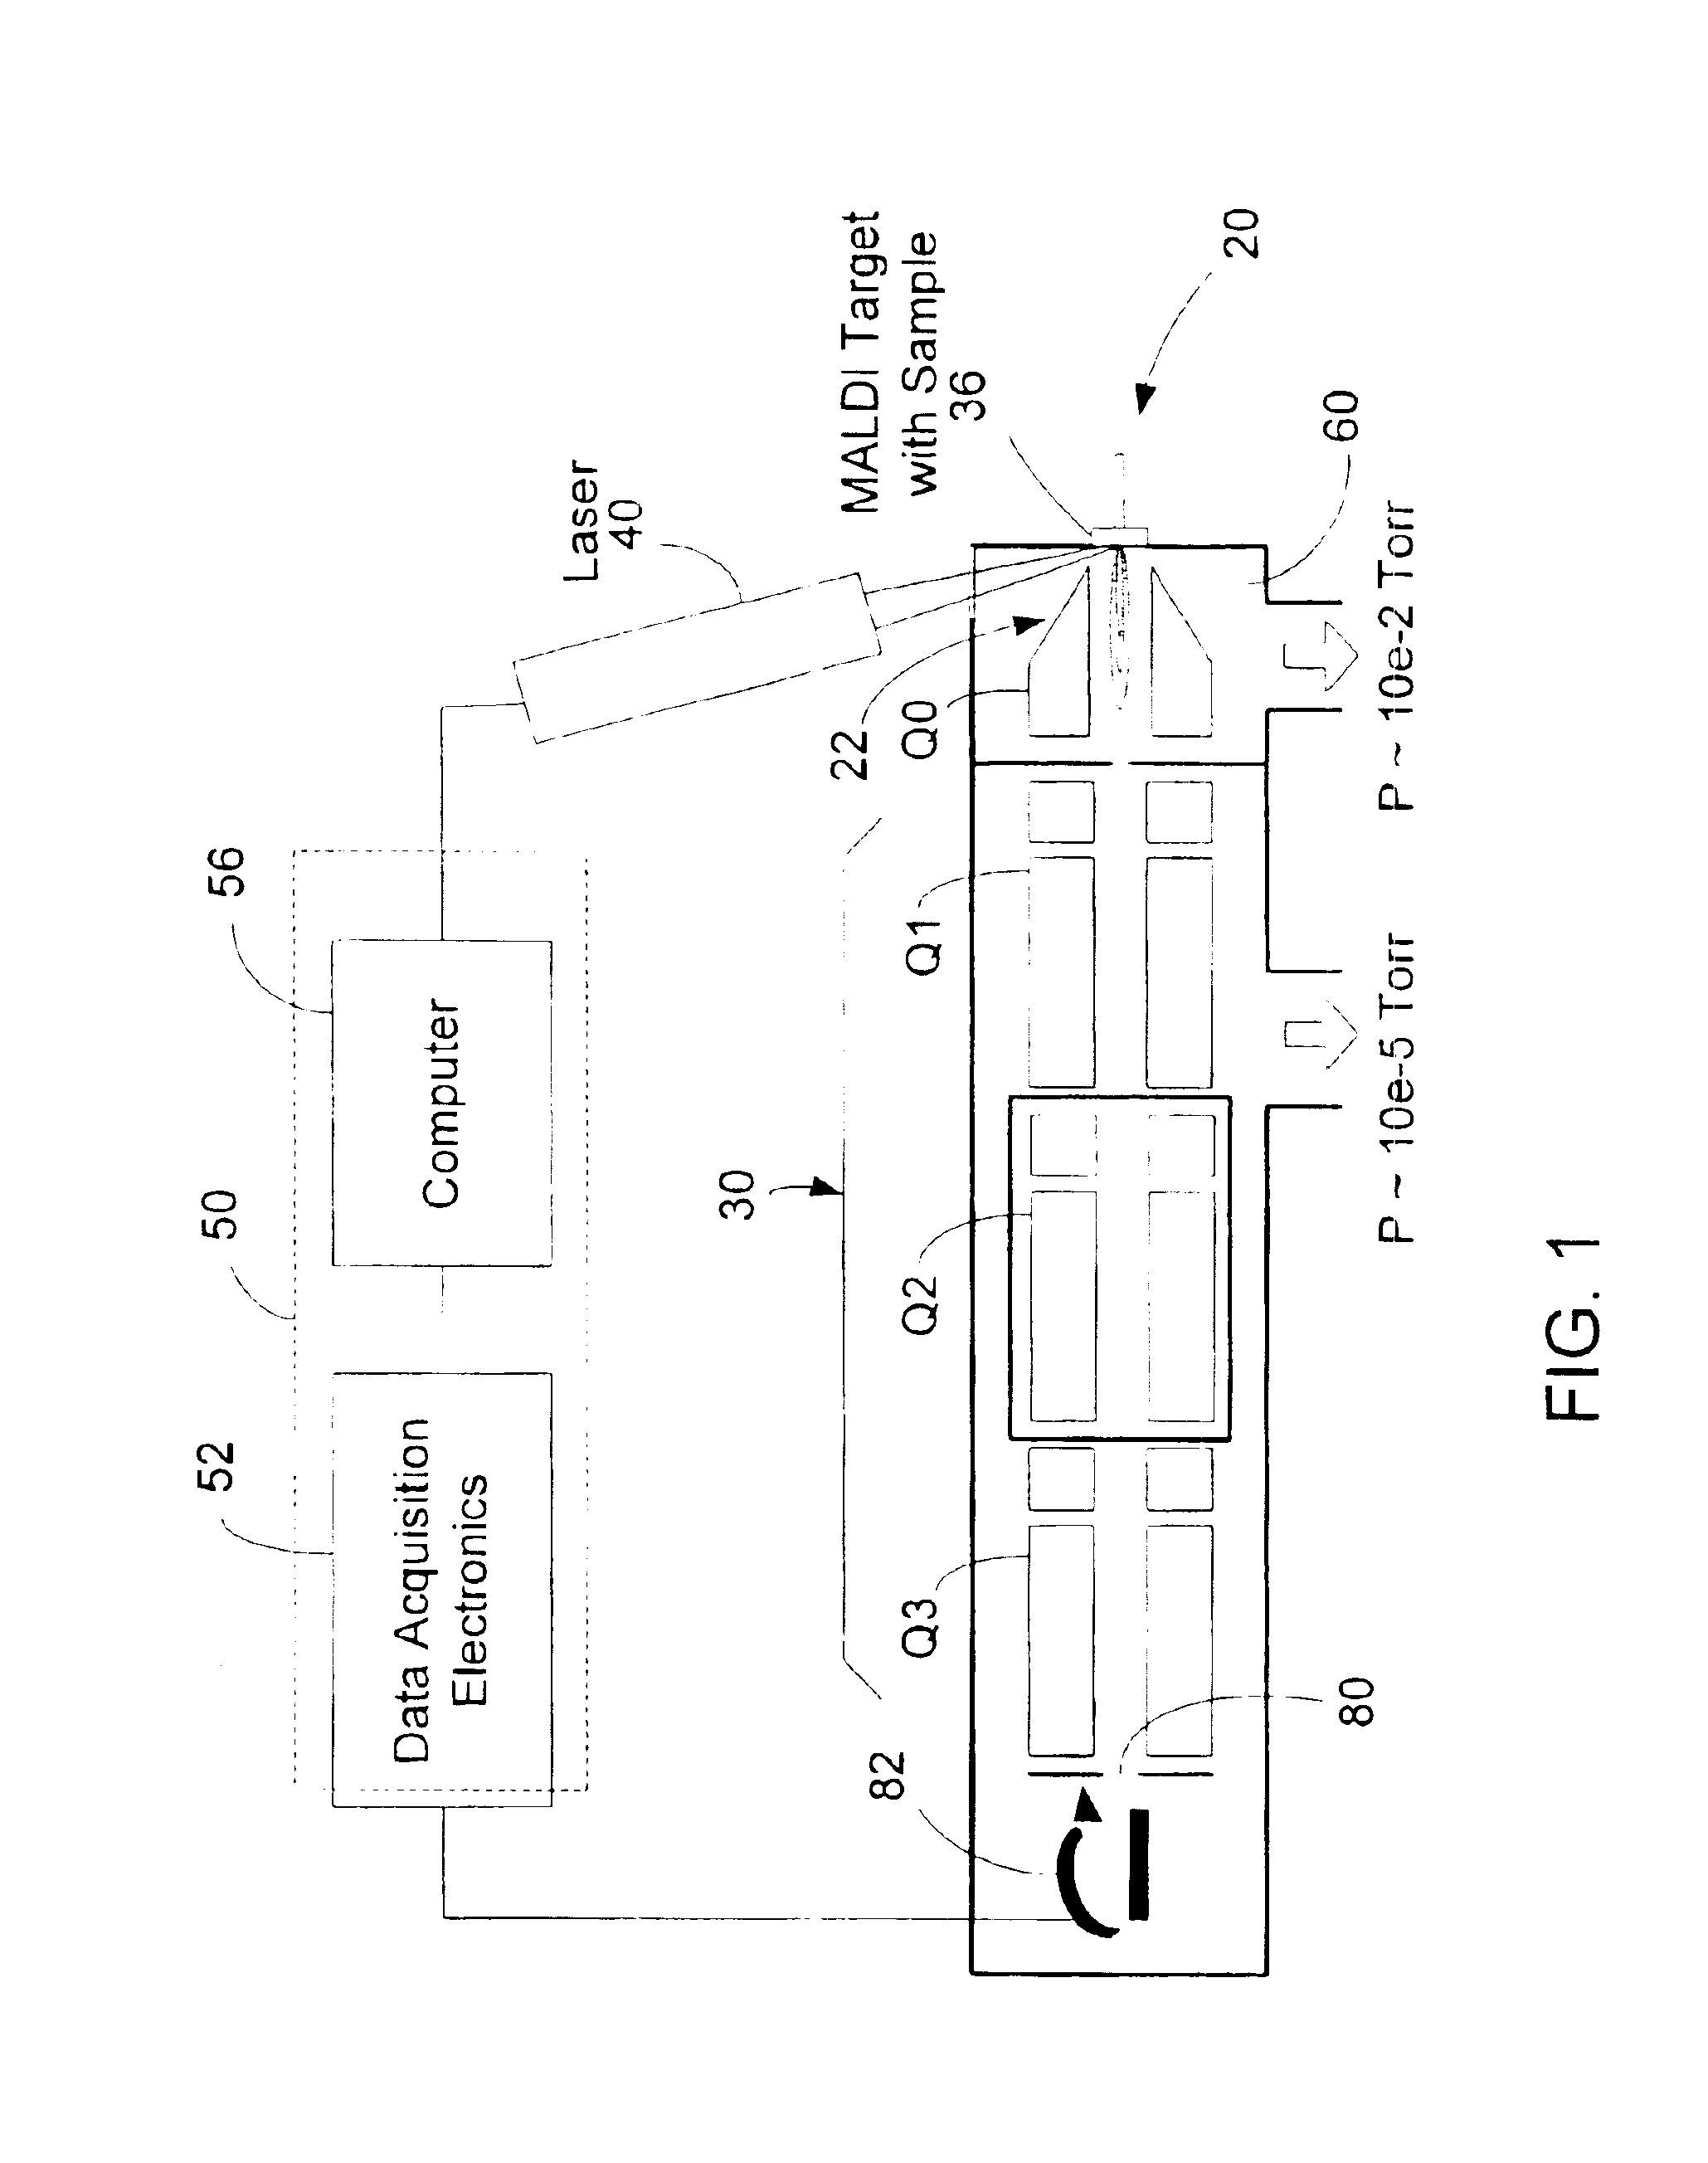 Method and system for high-throughput quantitation of small molecules using laser desorption and multiple-reaction-monitoring